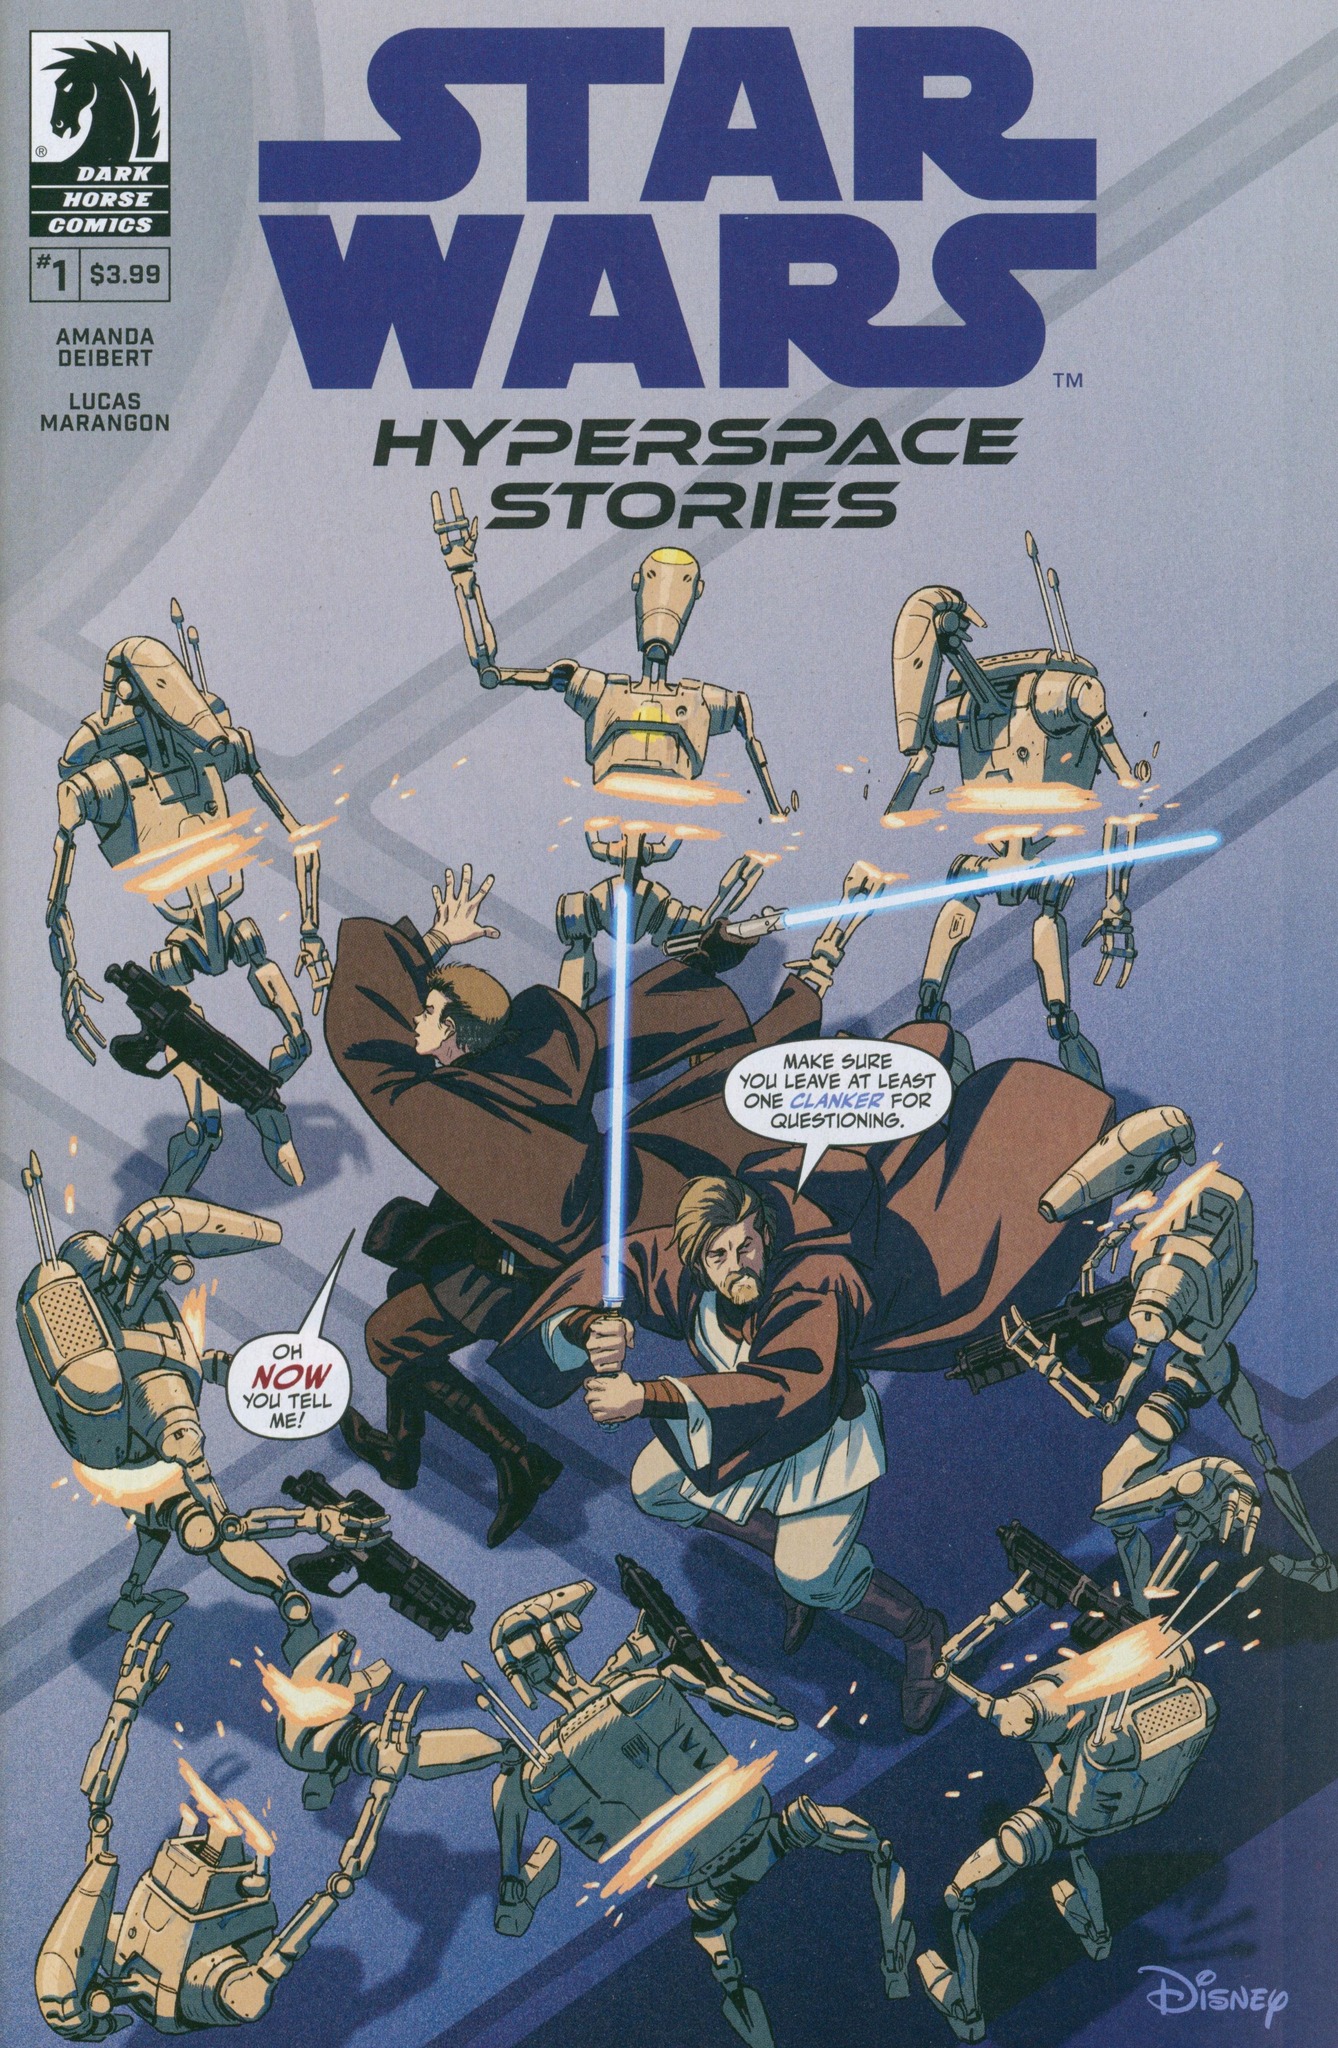 Hyperspace Stories #1 (Cover B by Miguel Valderrama) (24.08.2022)